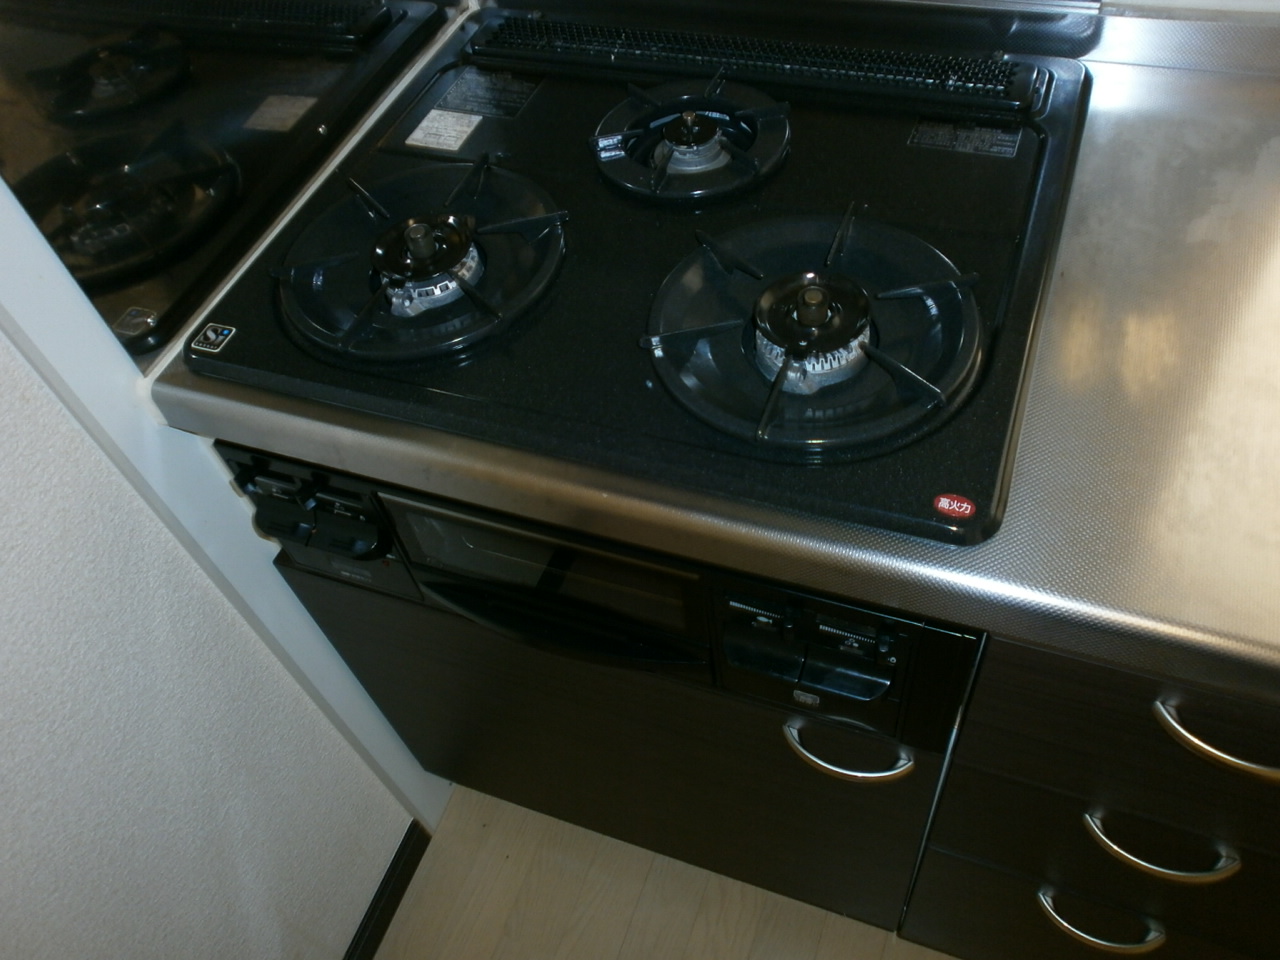 Kitchen. Built-in gas stove